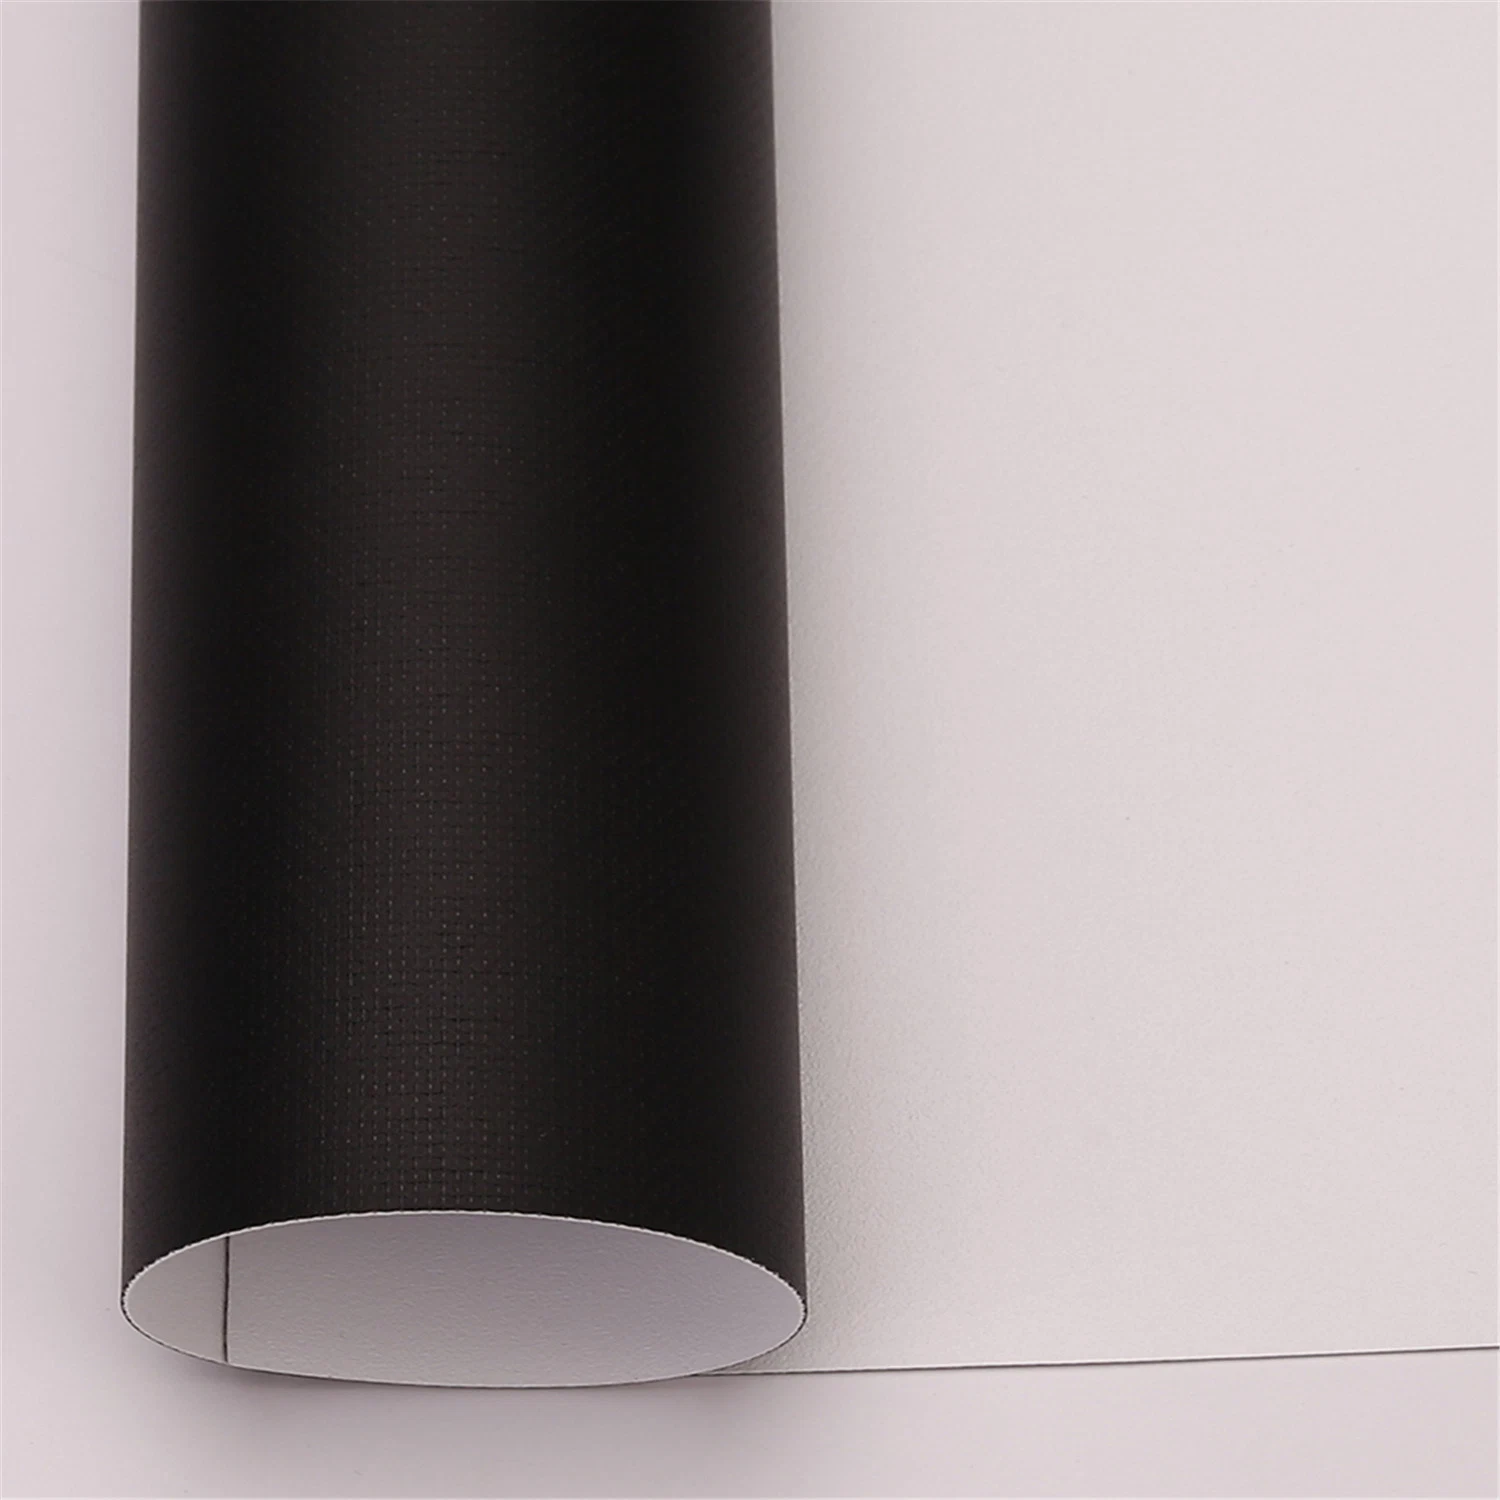 5.1m Width Flame Retardantprojection Screen Fabric for Electric Projection Screen